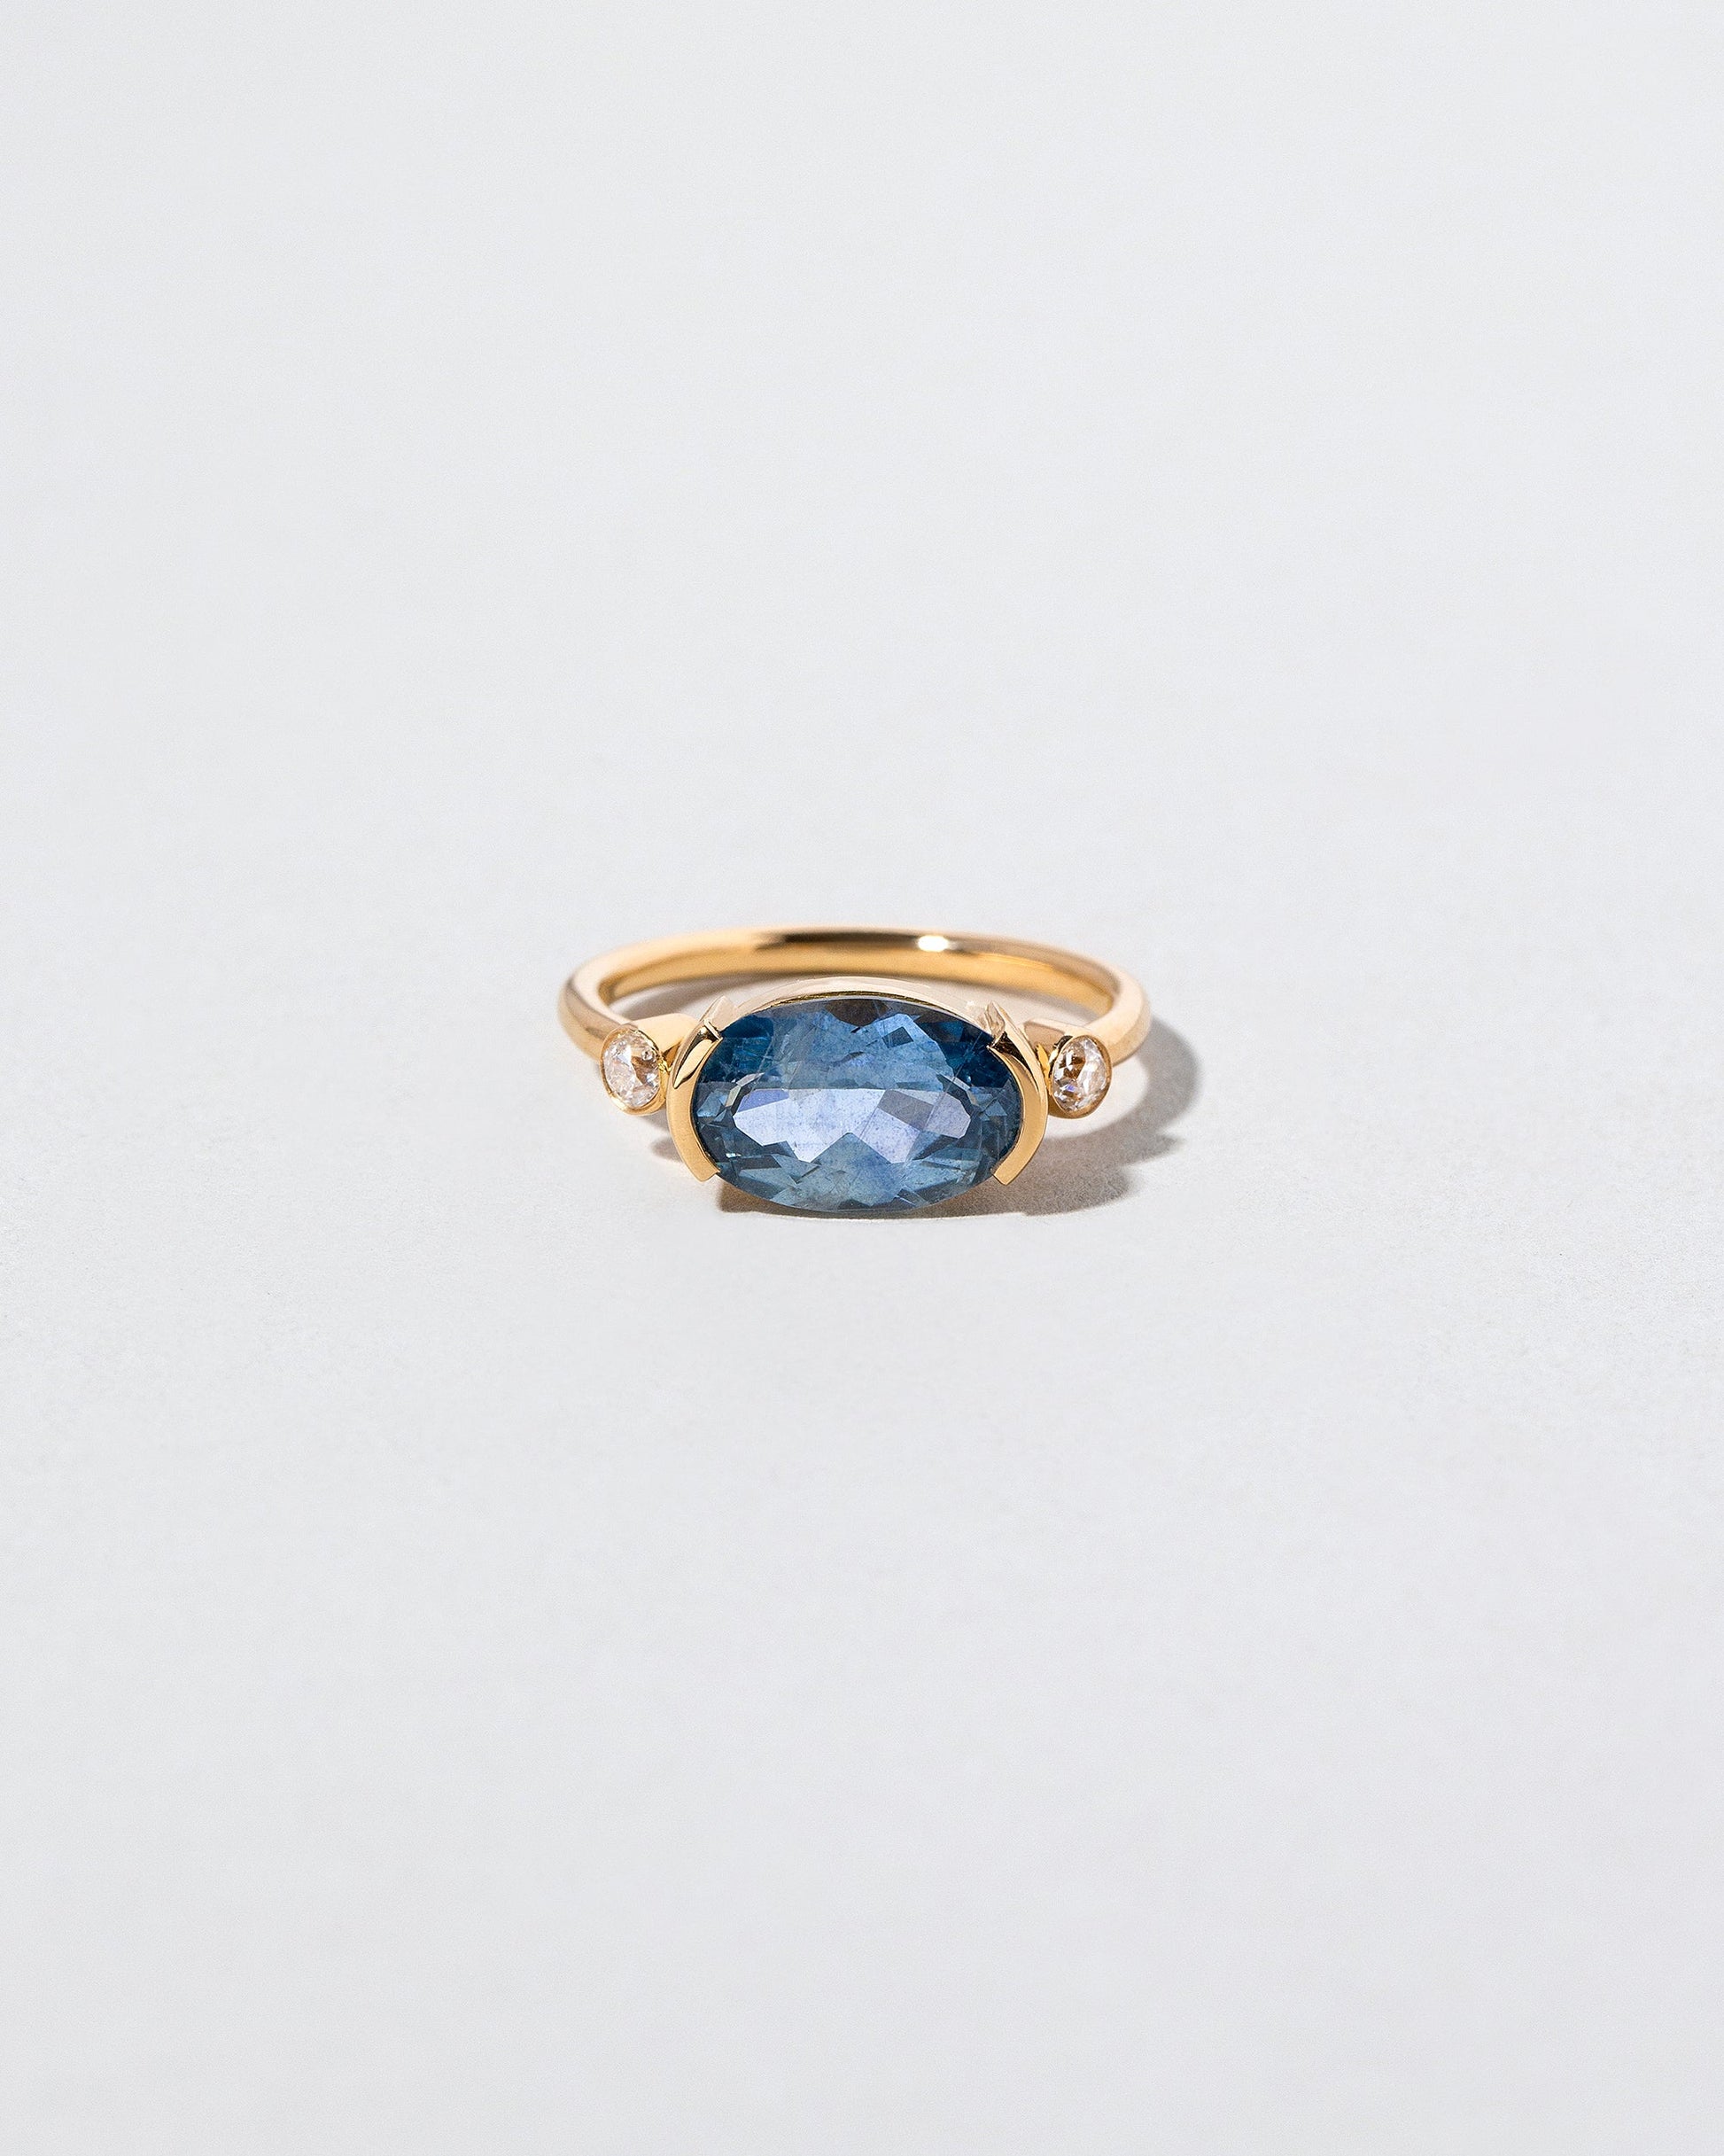  Beau Ring on light color background.